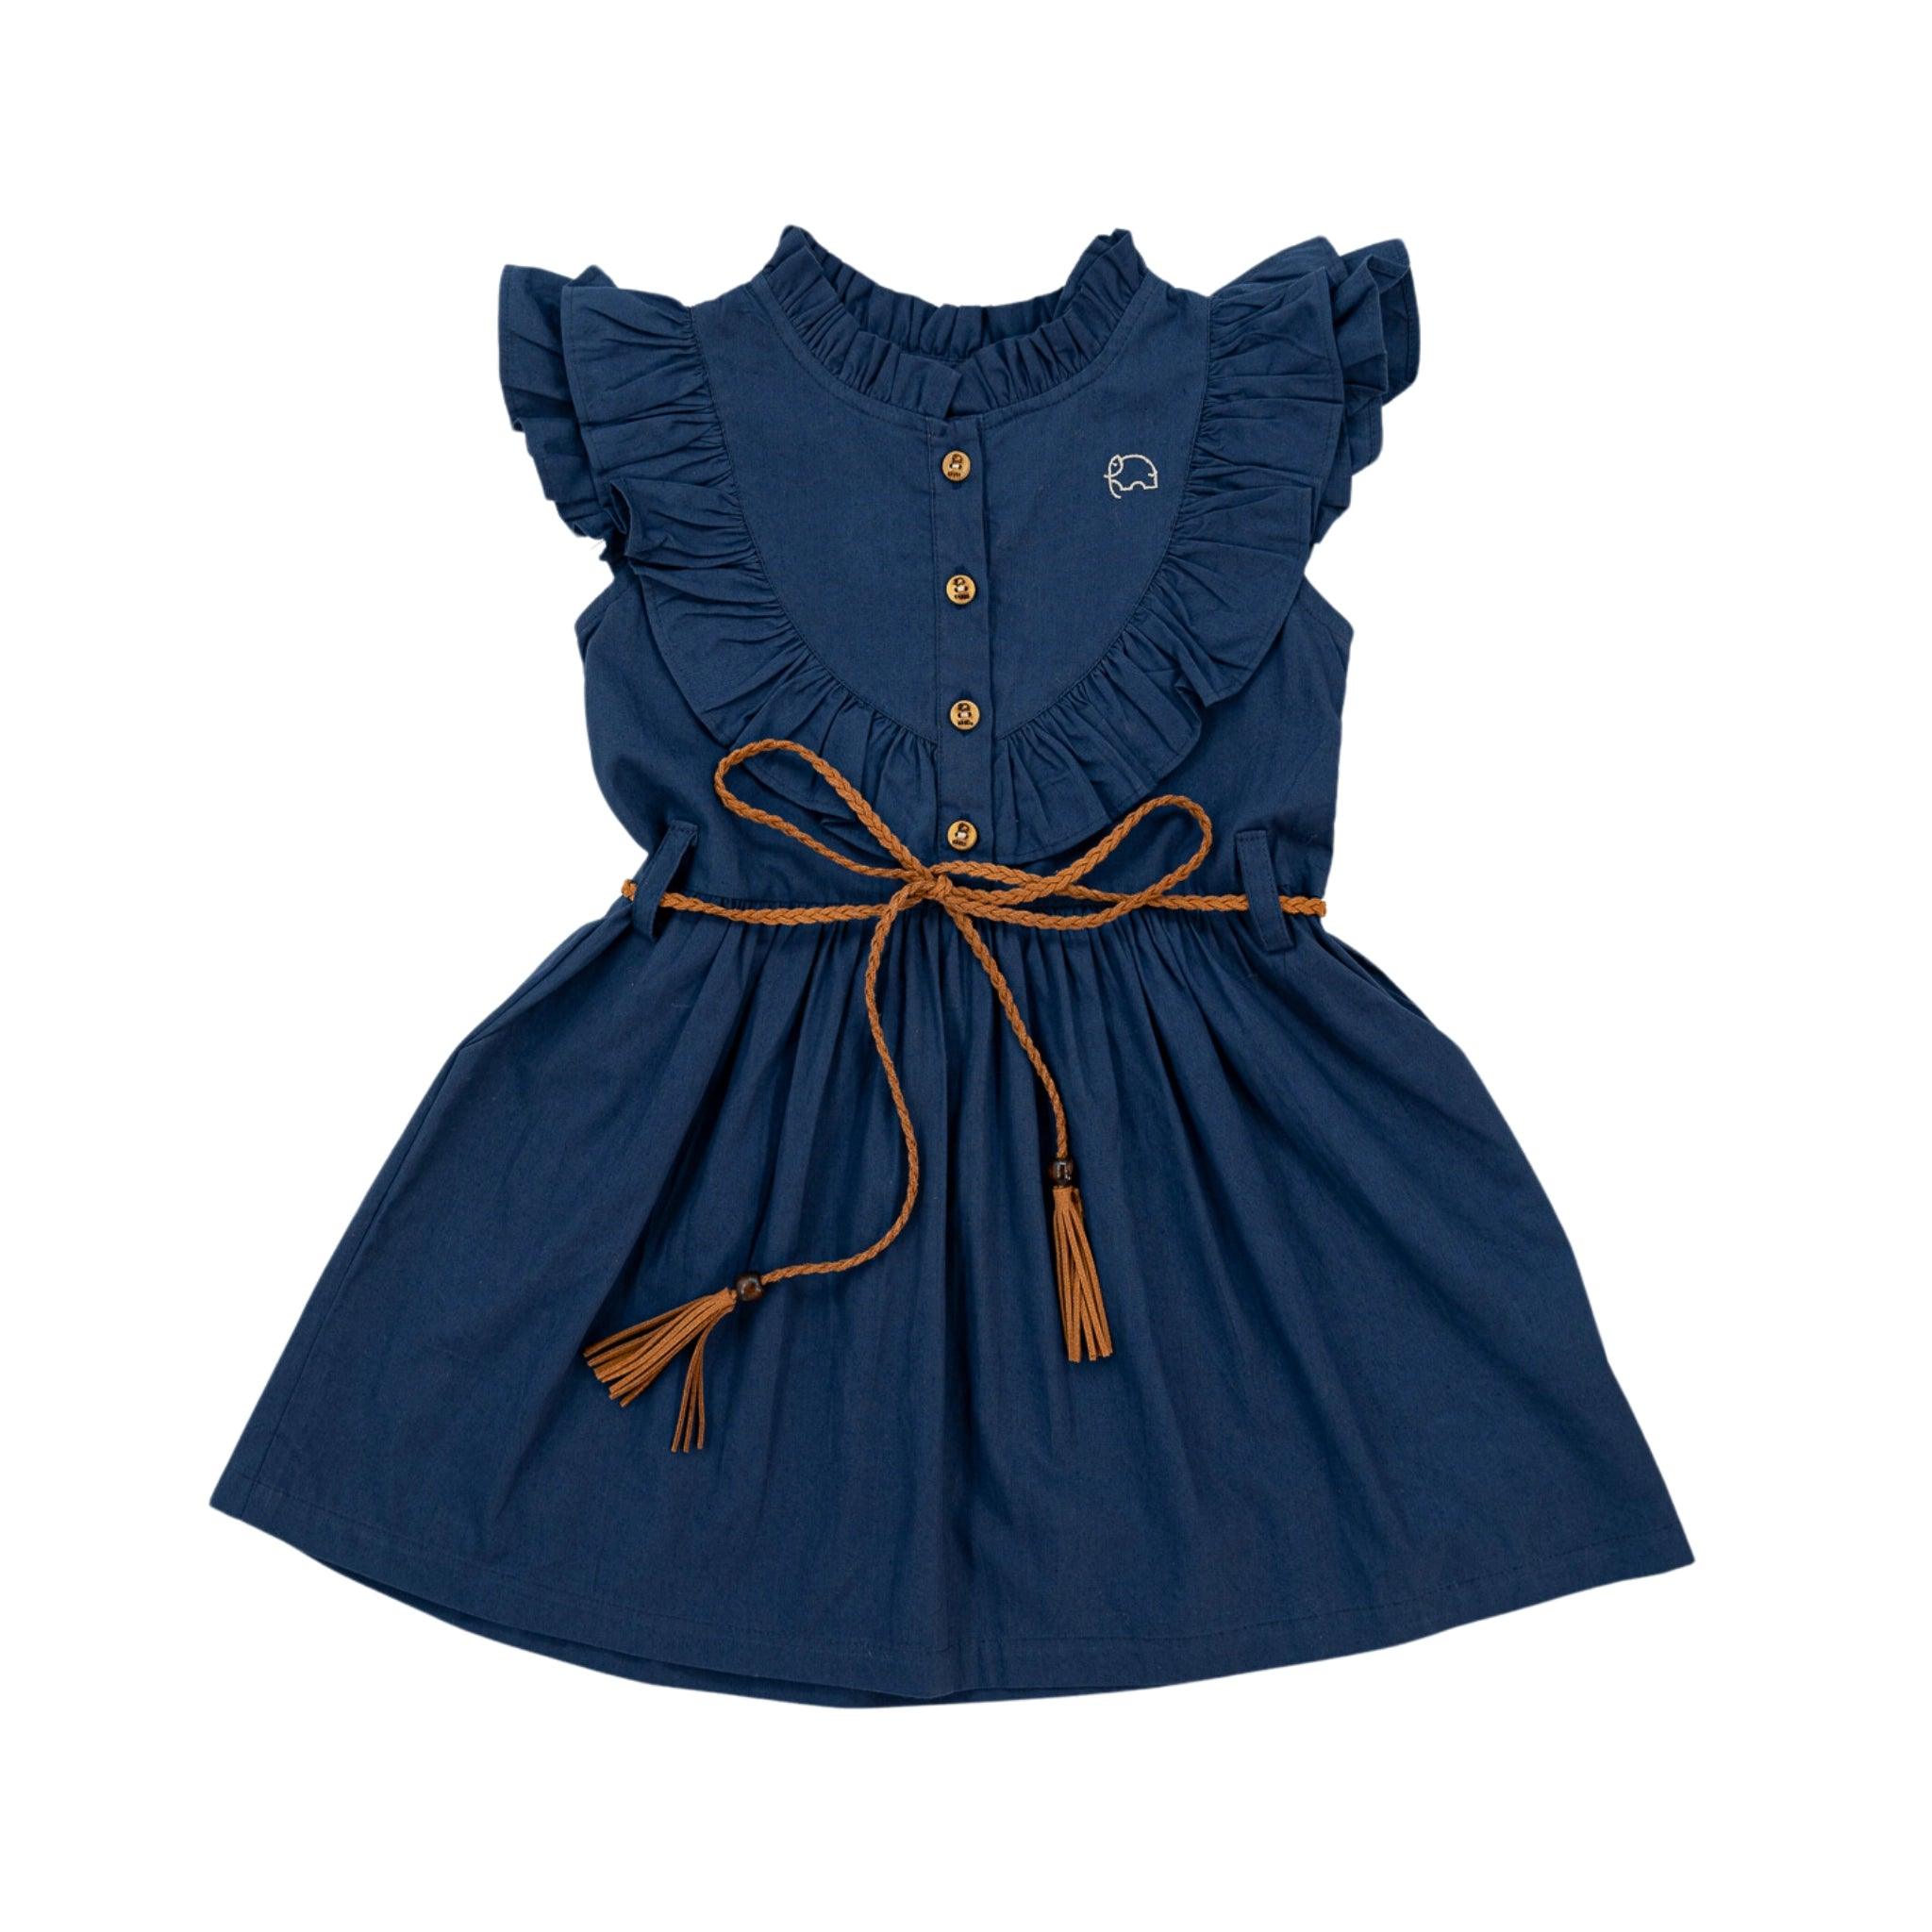 Navy blue toddler dress with butterfly sleeves and a brown tassel belt, isolated on a white background.